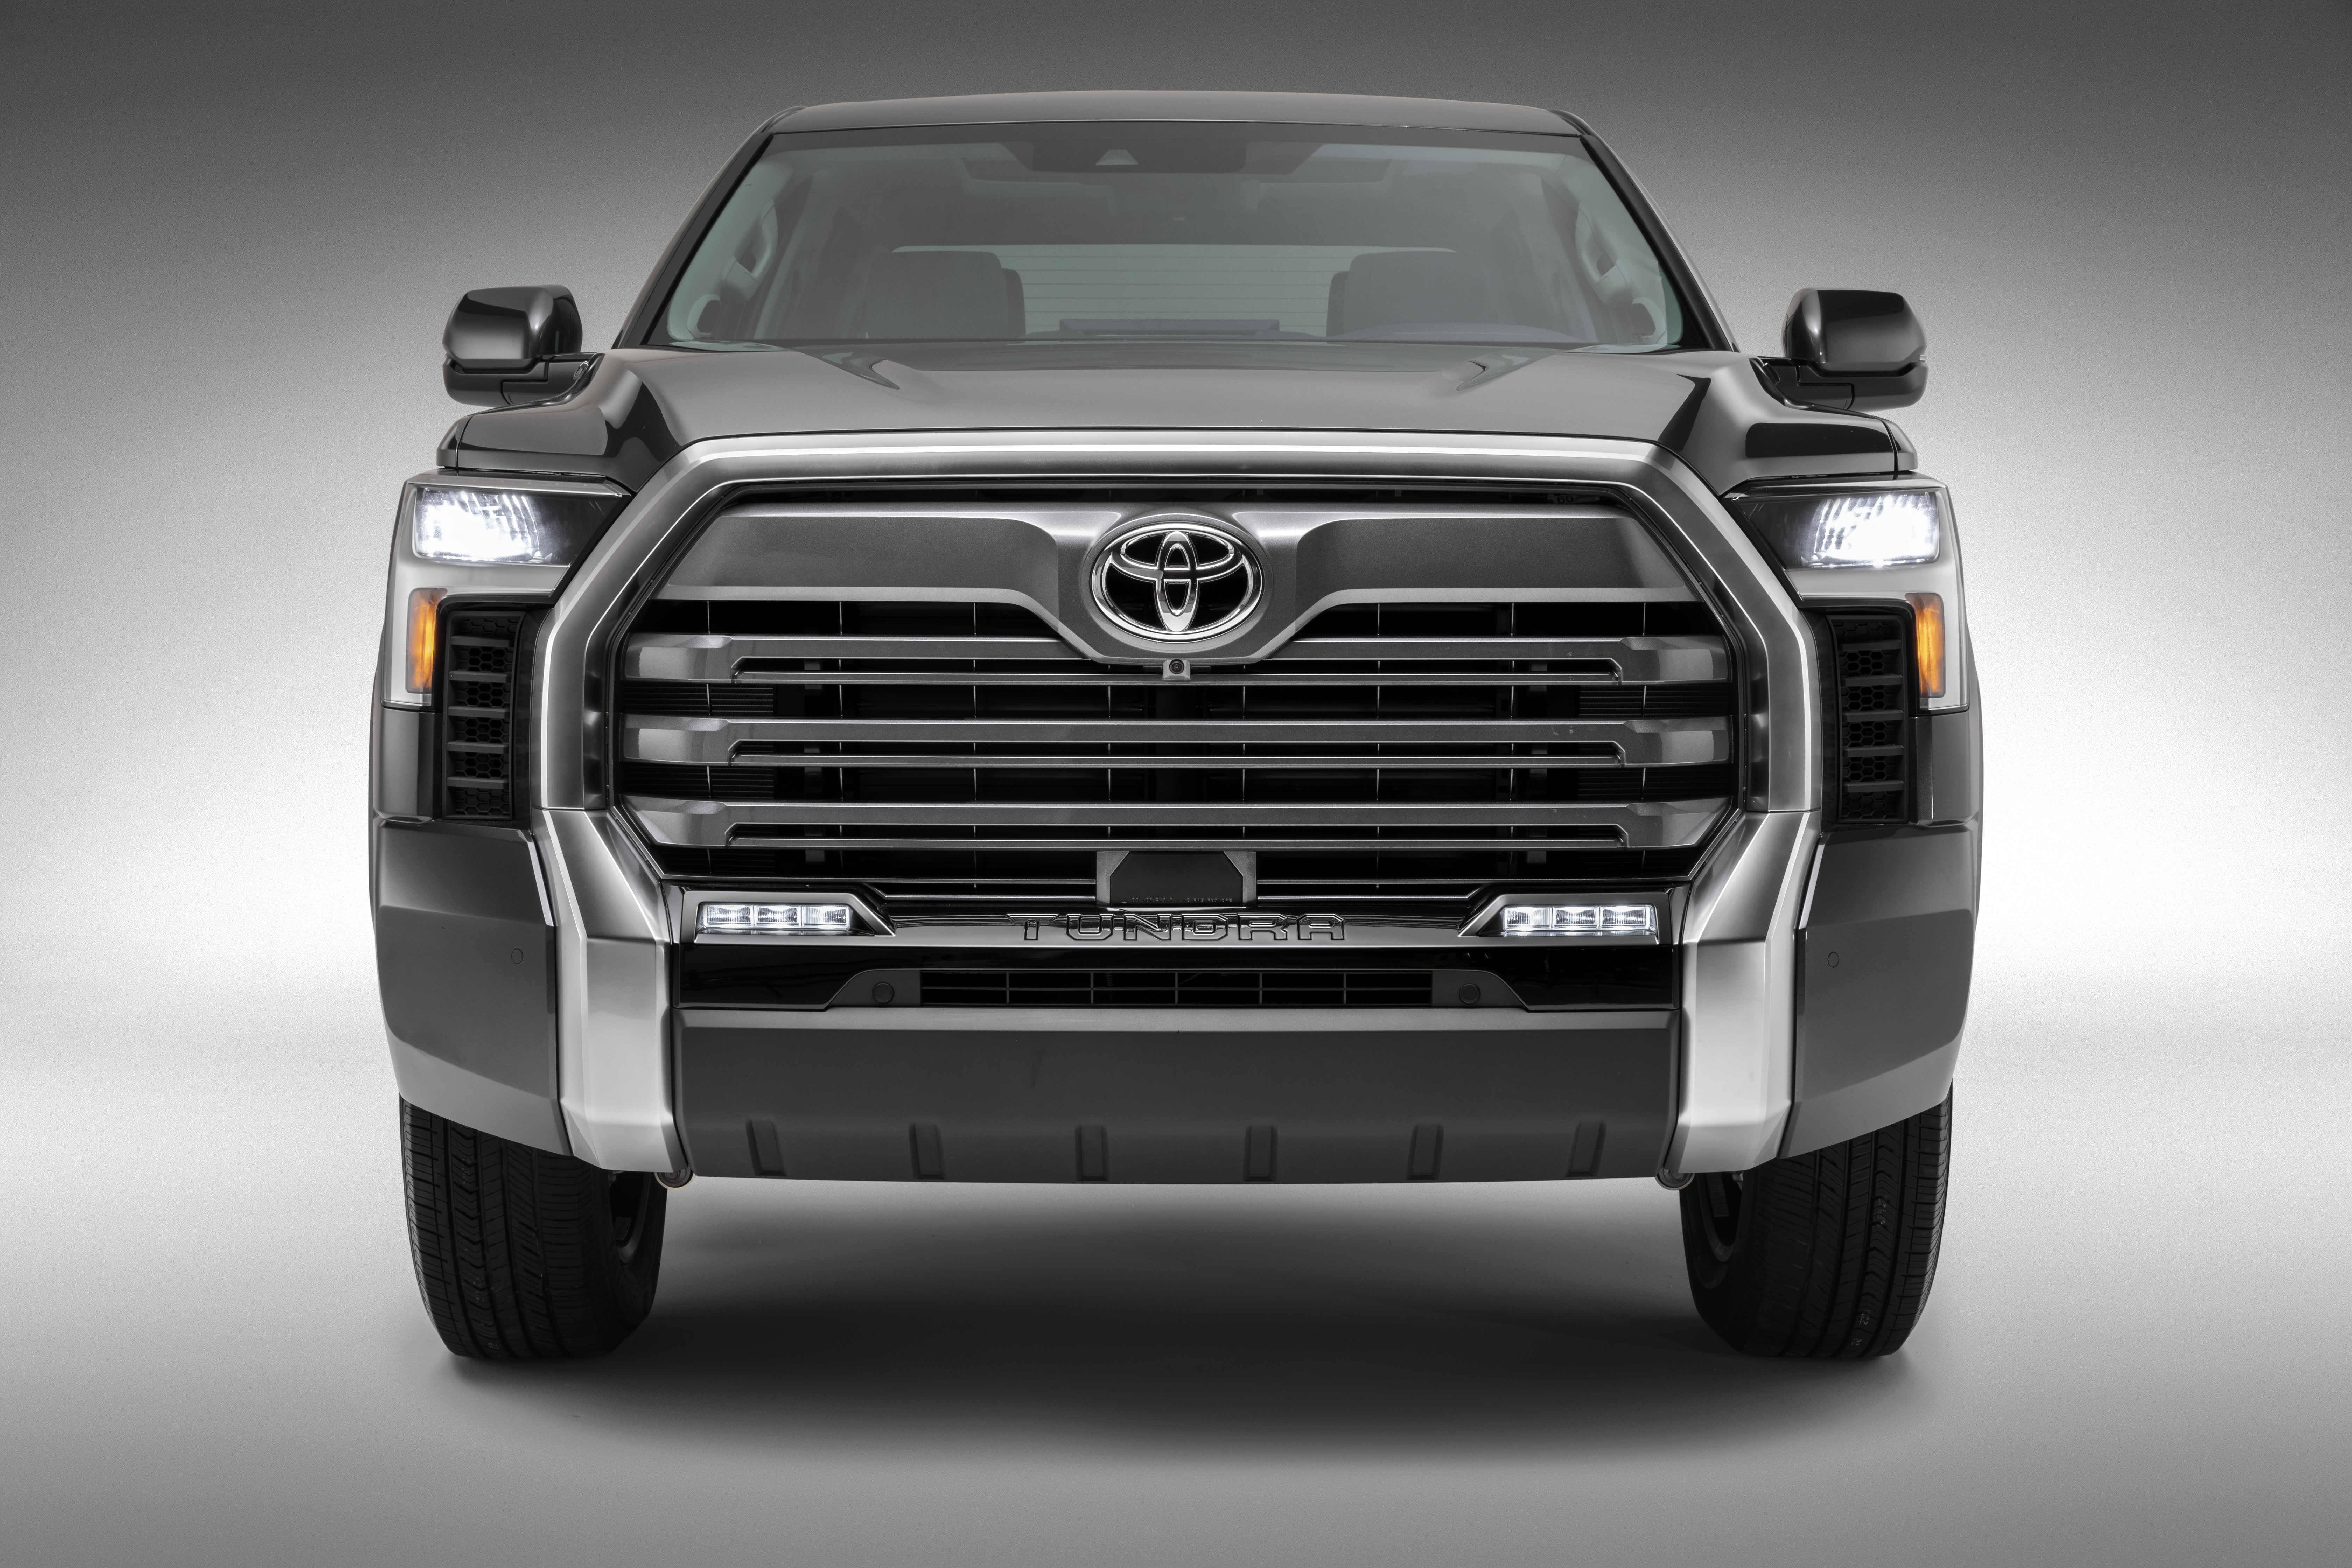 Toyota unveils new 2022 Tundra pickup truck with new hybrid engine